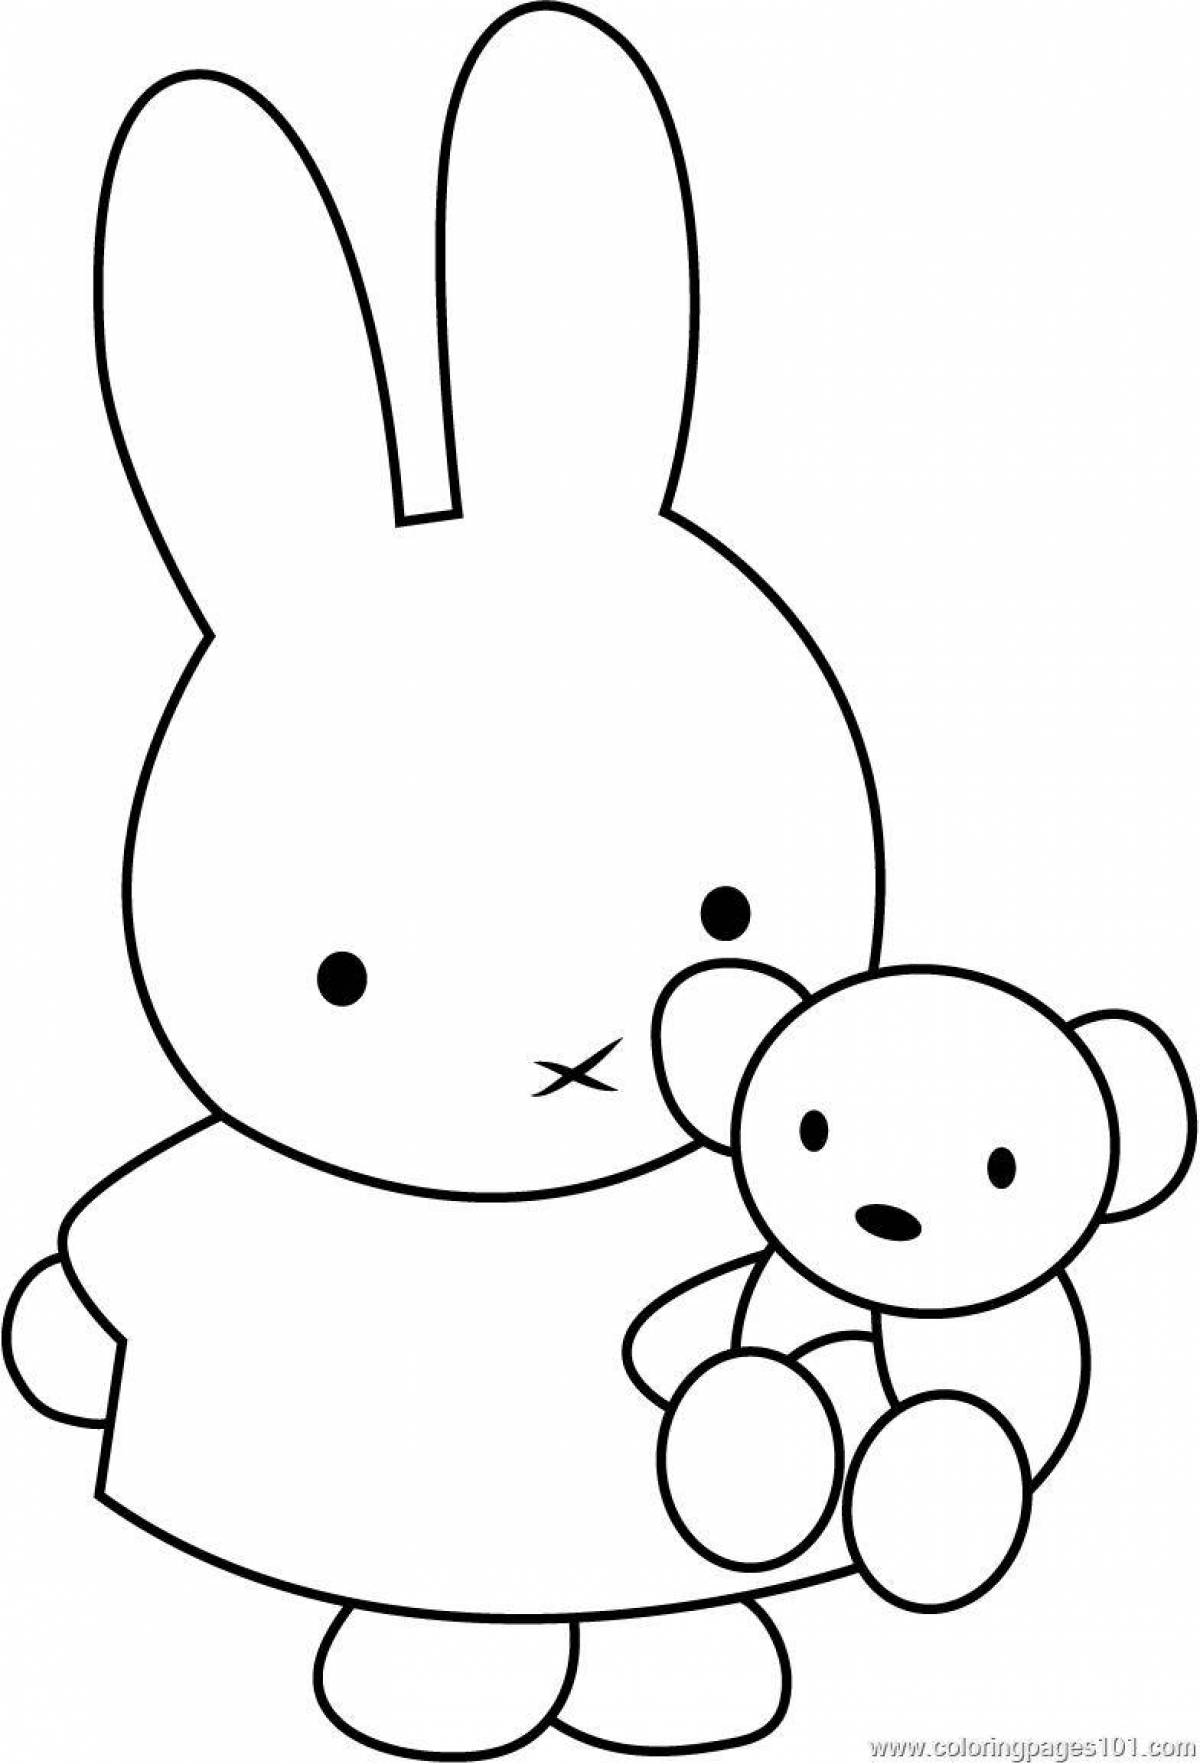 Cute and playful bunny coloring book